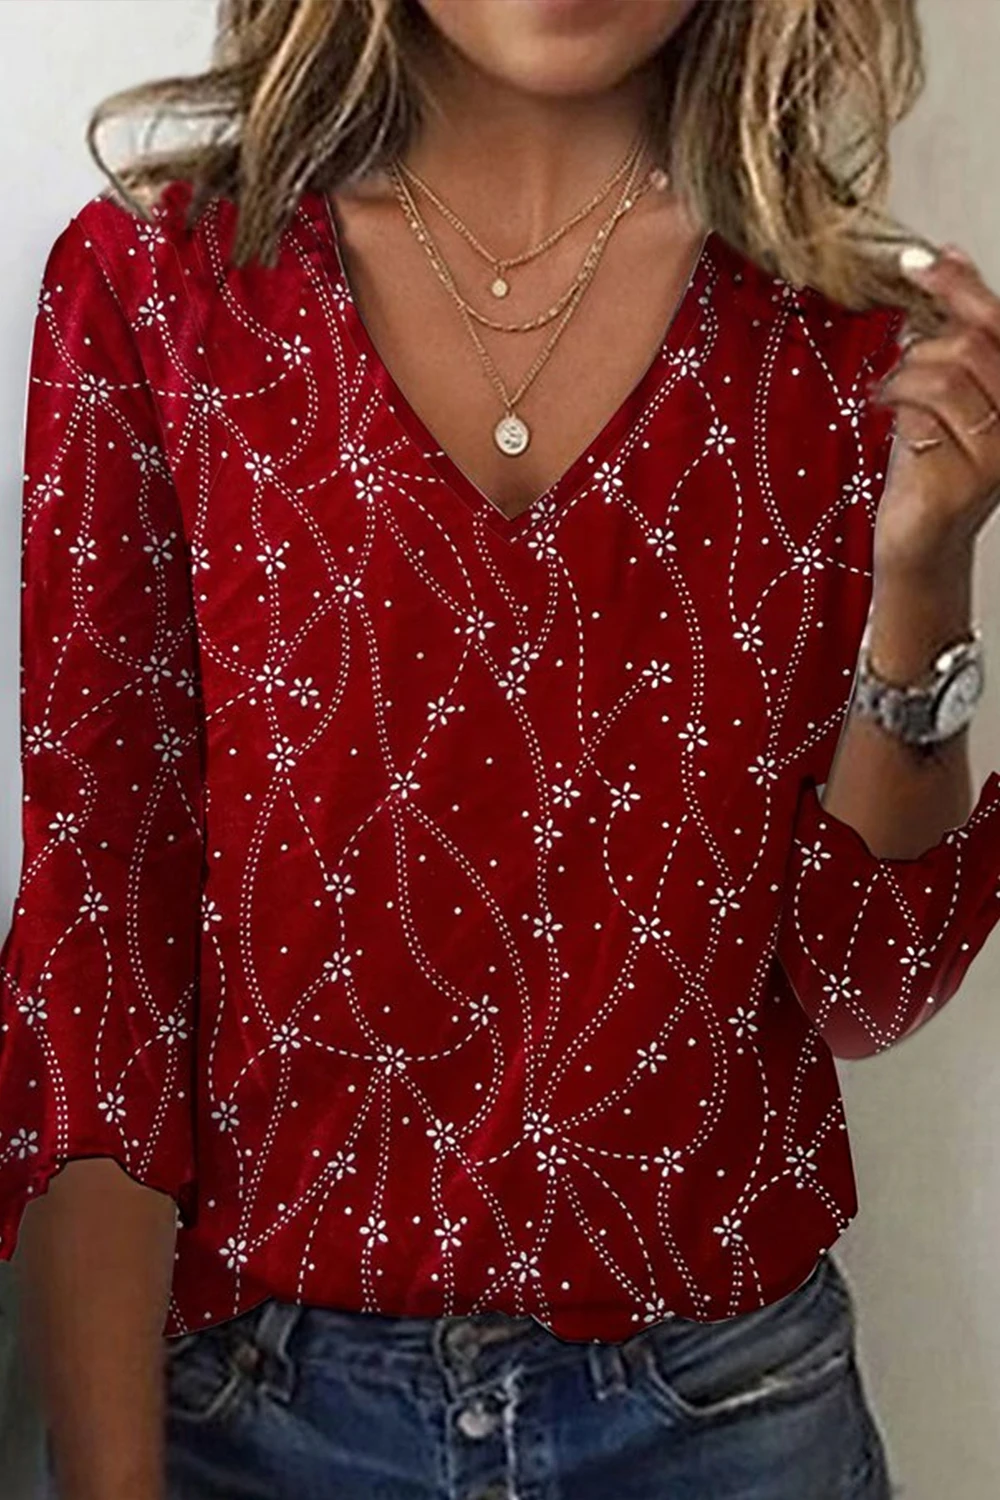 Flycurvy Plus Size Christmas Red Disty Floral Print 3/4 Flare Sleeve Blouse